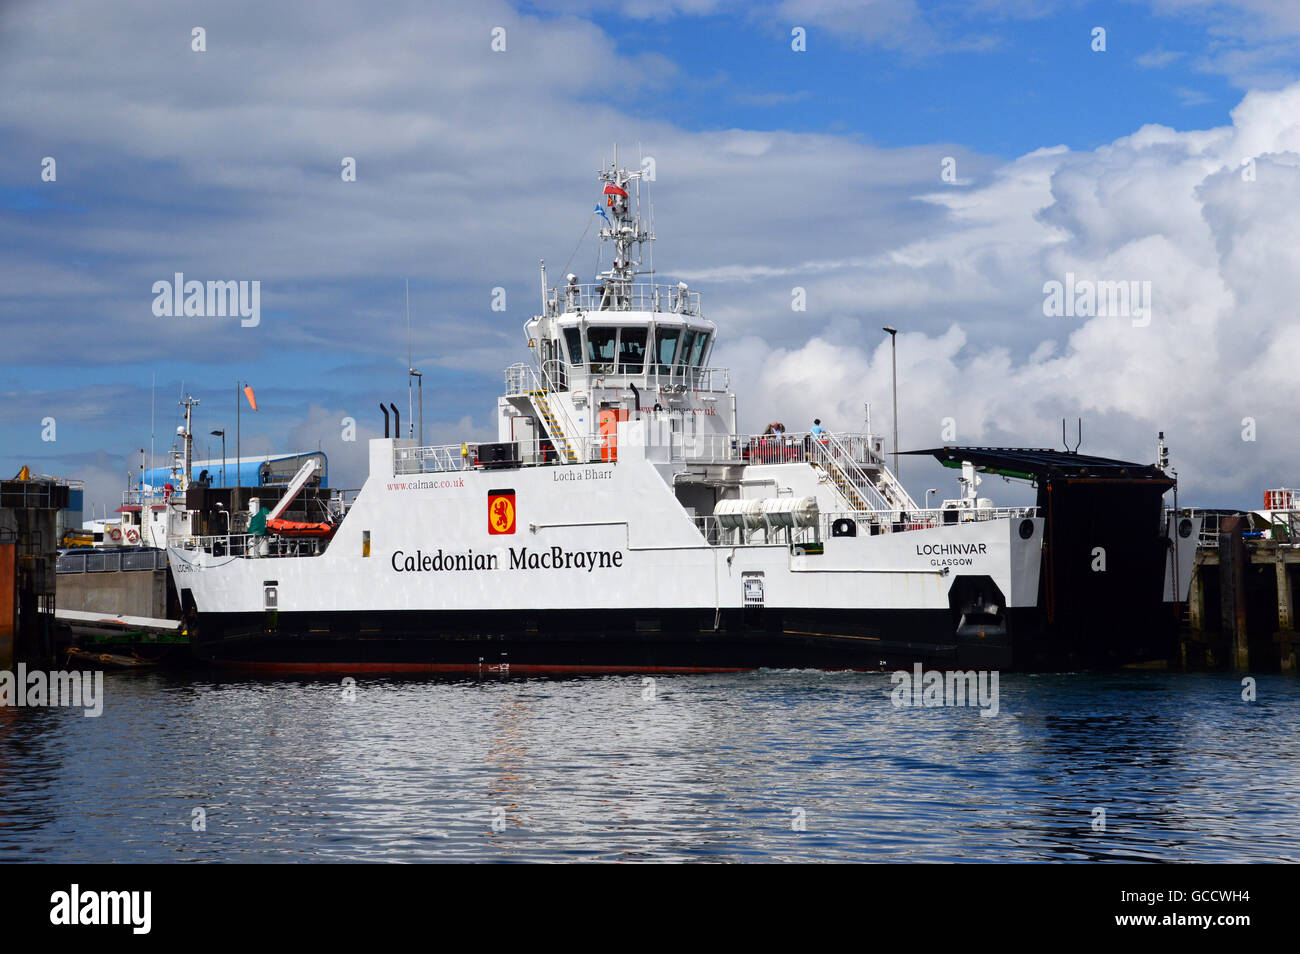 The Caladonian MacBrayne Ferry Boat Loch a Bharr, Lochinver Moored in Mallaig Harbour in the Northwest Highlands, Scotland UK Stock Photo